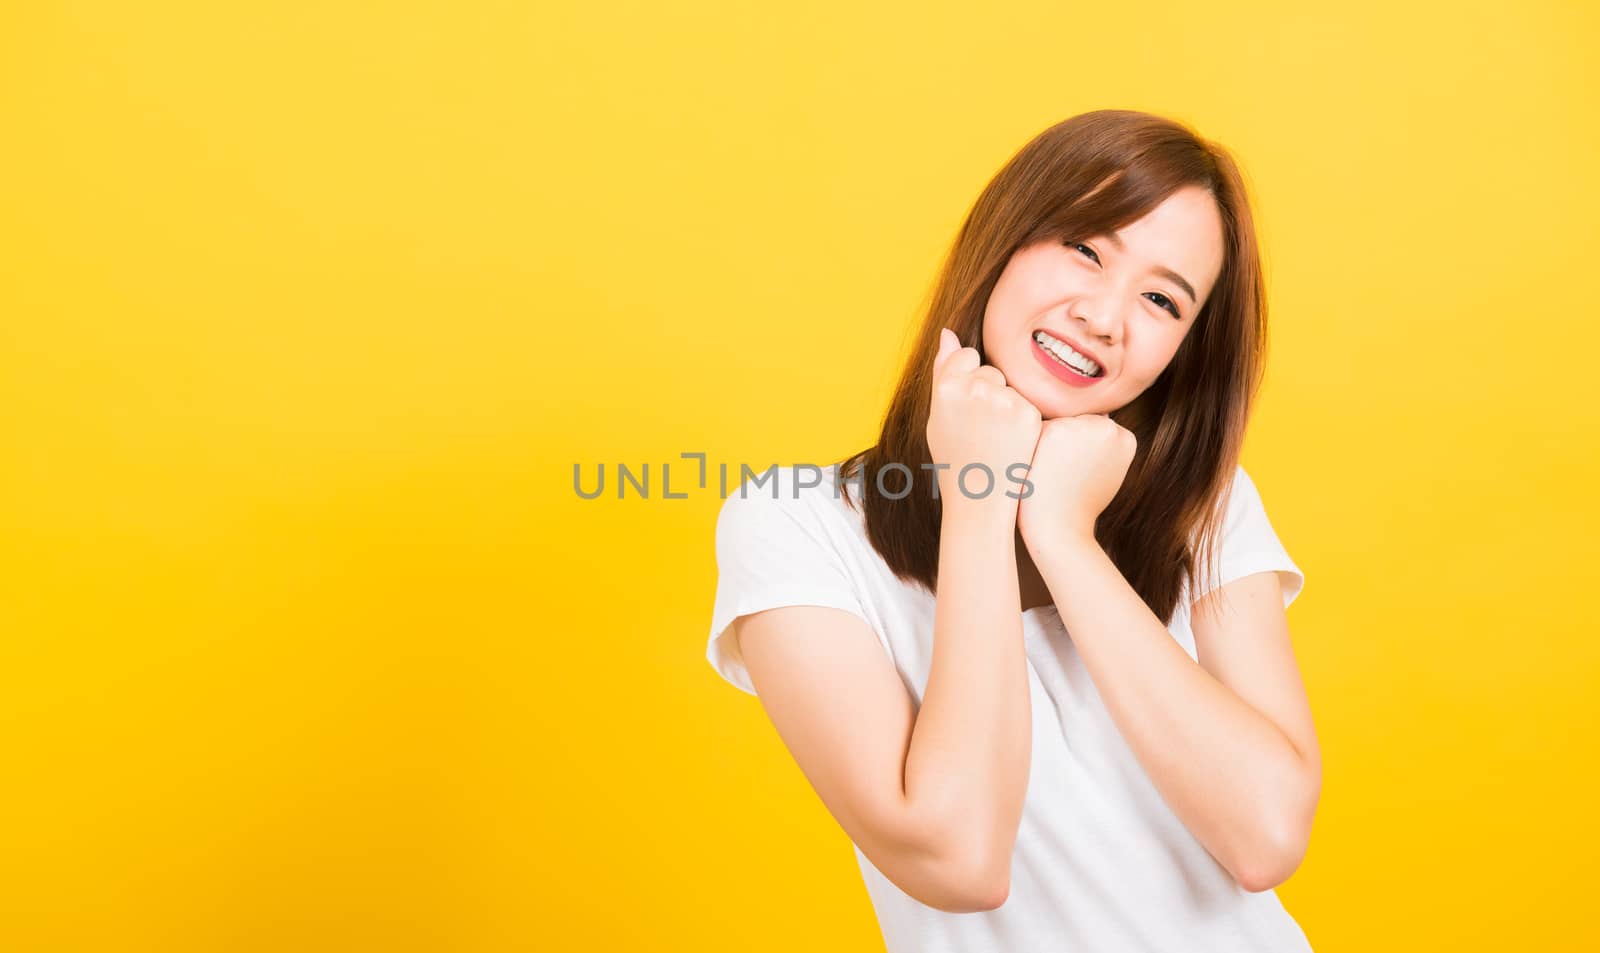 Asian happy portrait beautiful cute young woman teen stand wear t-shirt happy expression fist pressed together under chin looking to camera isolated, studio shot on yellow background with copy space